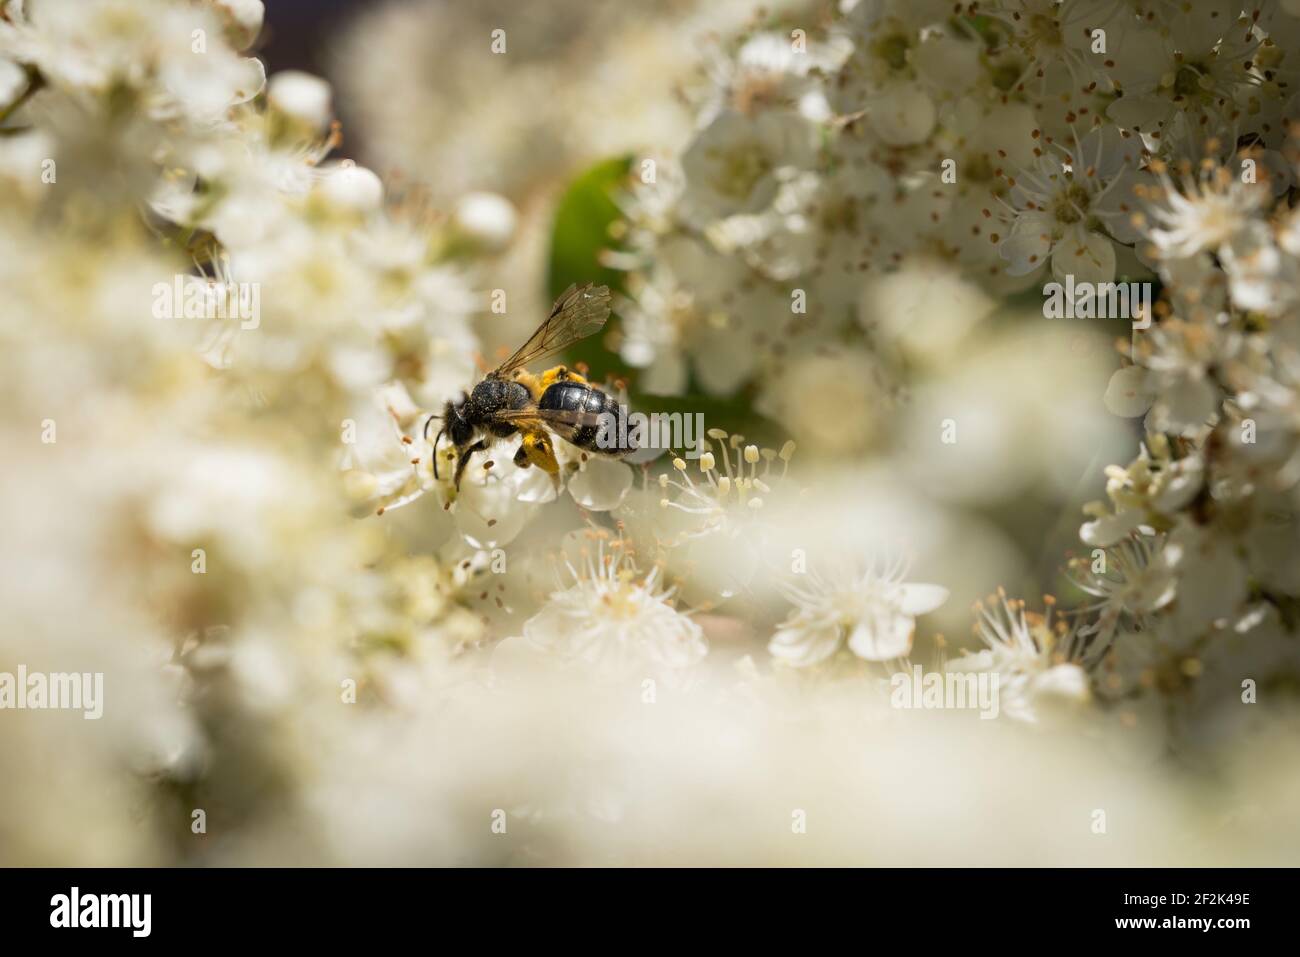 An Andrena minutula (common mini-mining bee) on the flowers of a firethorn, or pyracantha, in a garden in Exeter, Devon, UK. Stock Photo